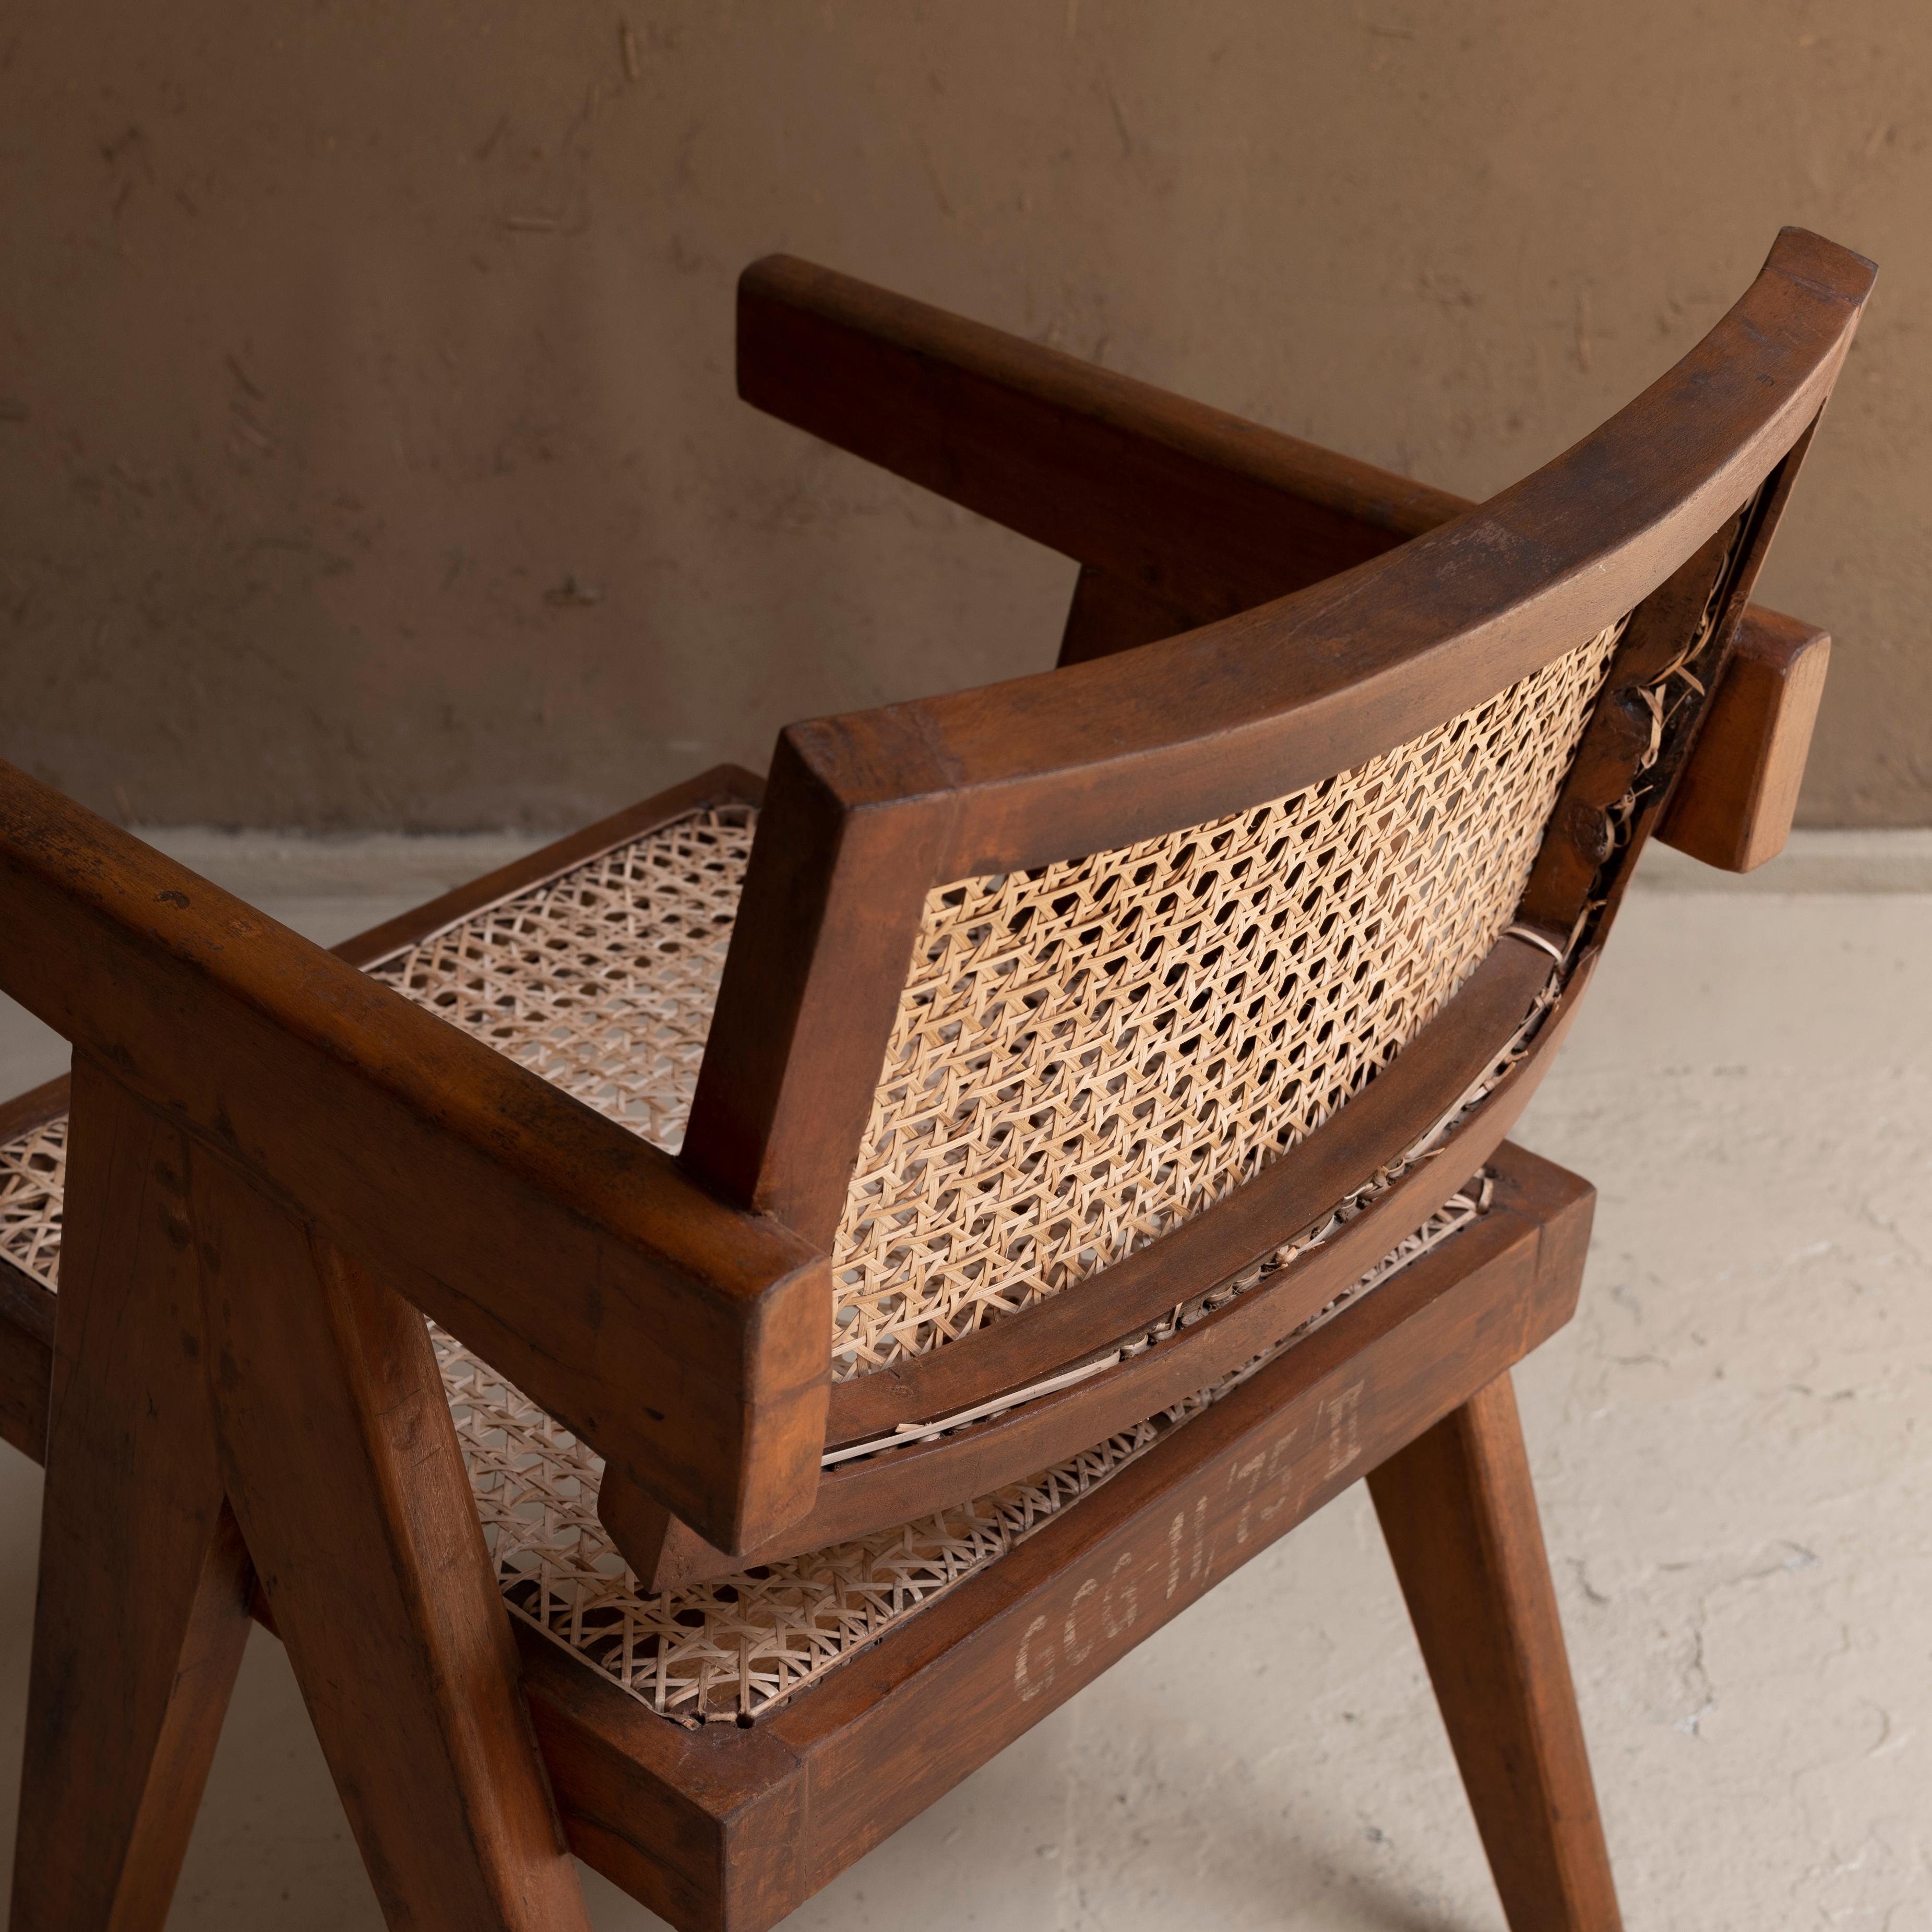 Mid-20th Century Pierre Jeanneret Office Chair, circa 1955-1956, Chandigarh, India For Sale